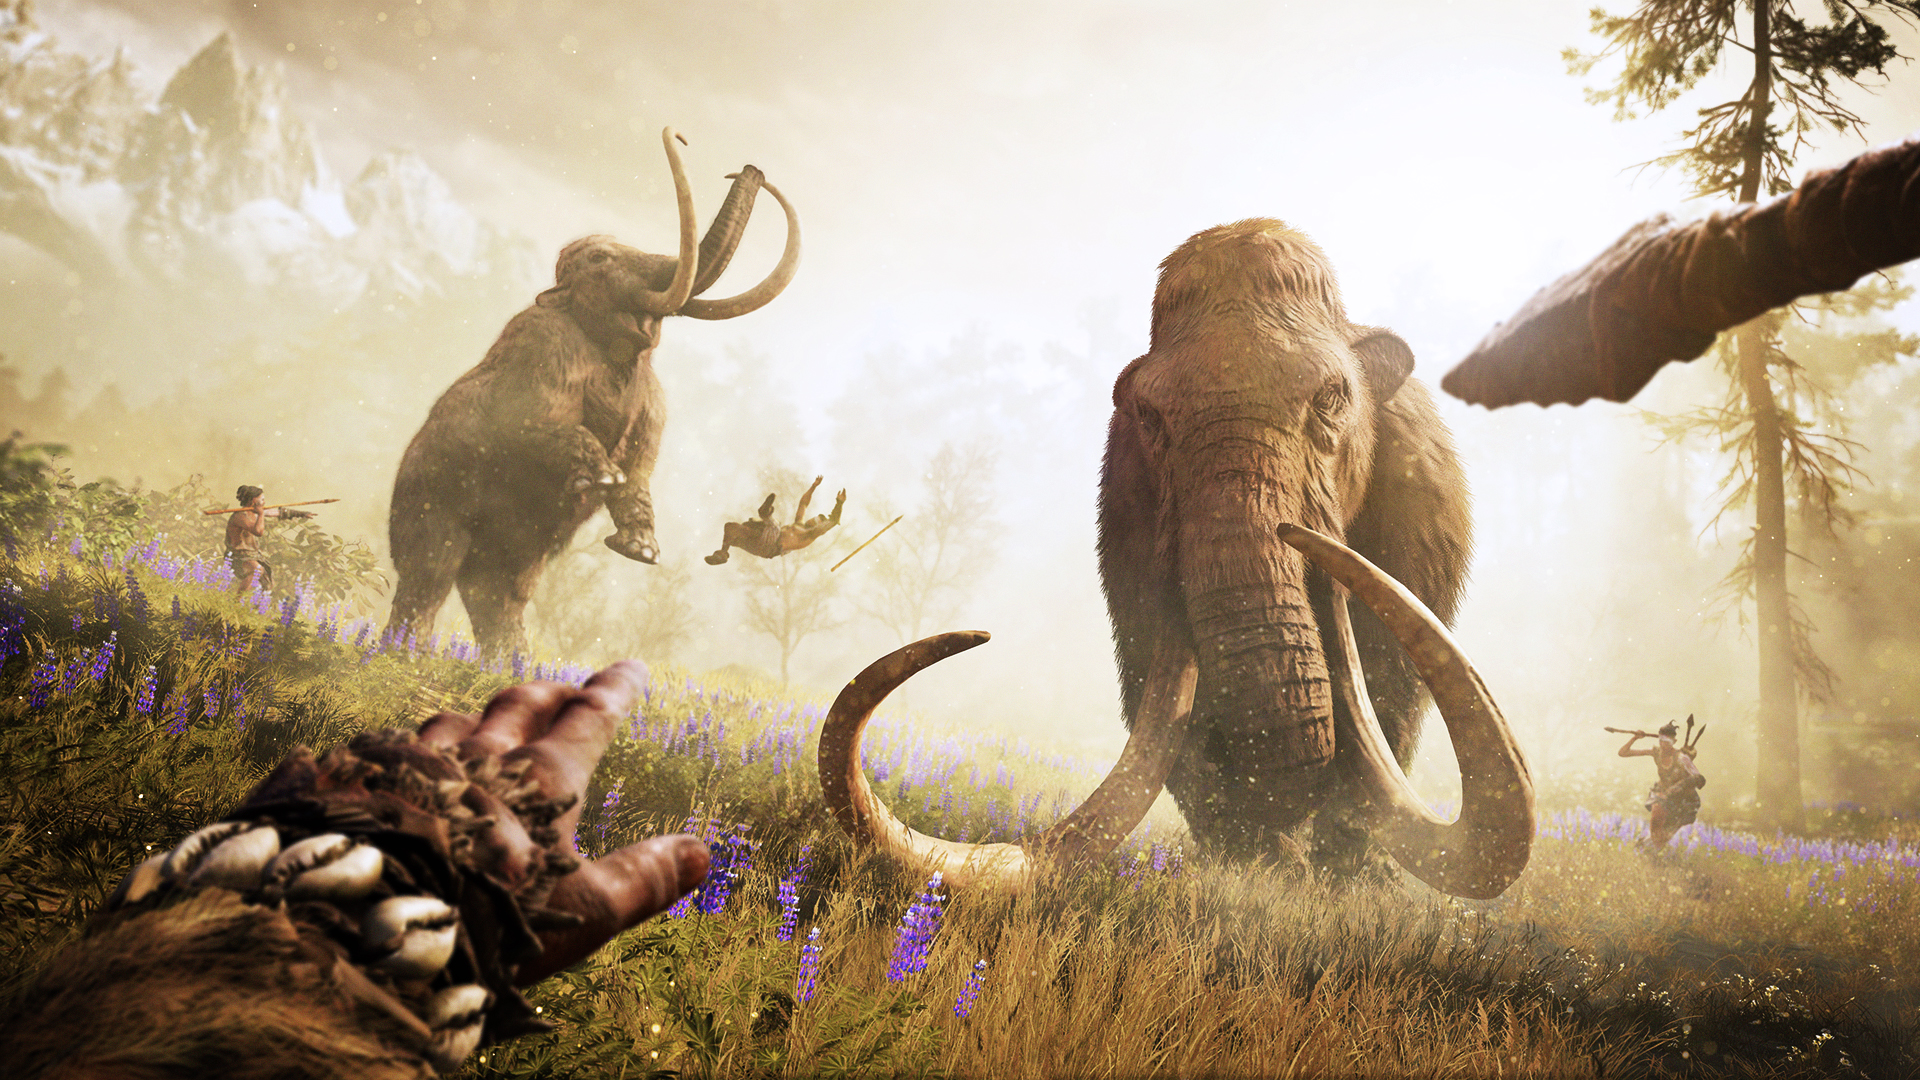 RUMOR: “Far Cry 4” Maps Recycled for “Far Cry Primal” - Or maybe 